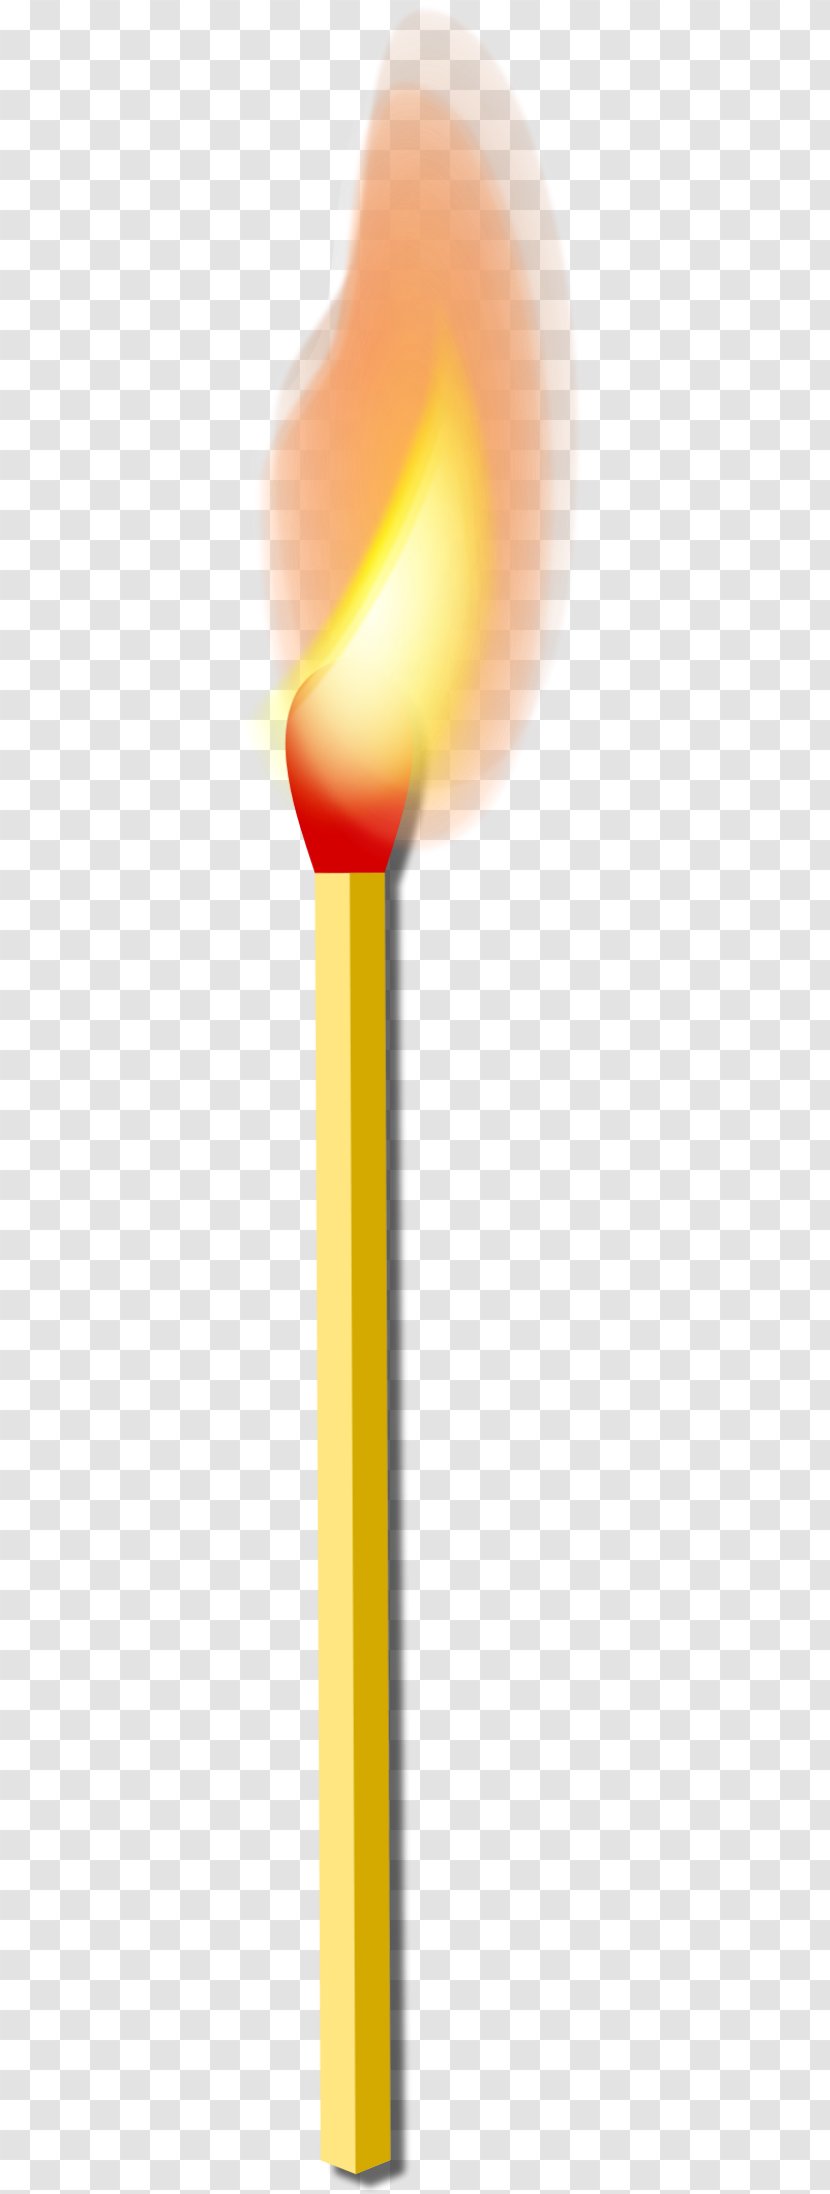 Match Fire Combustion Product Image - Remix - Striking A Transparent PNG